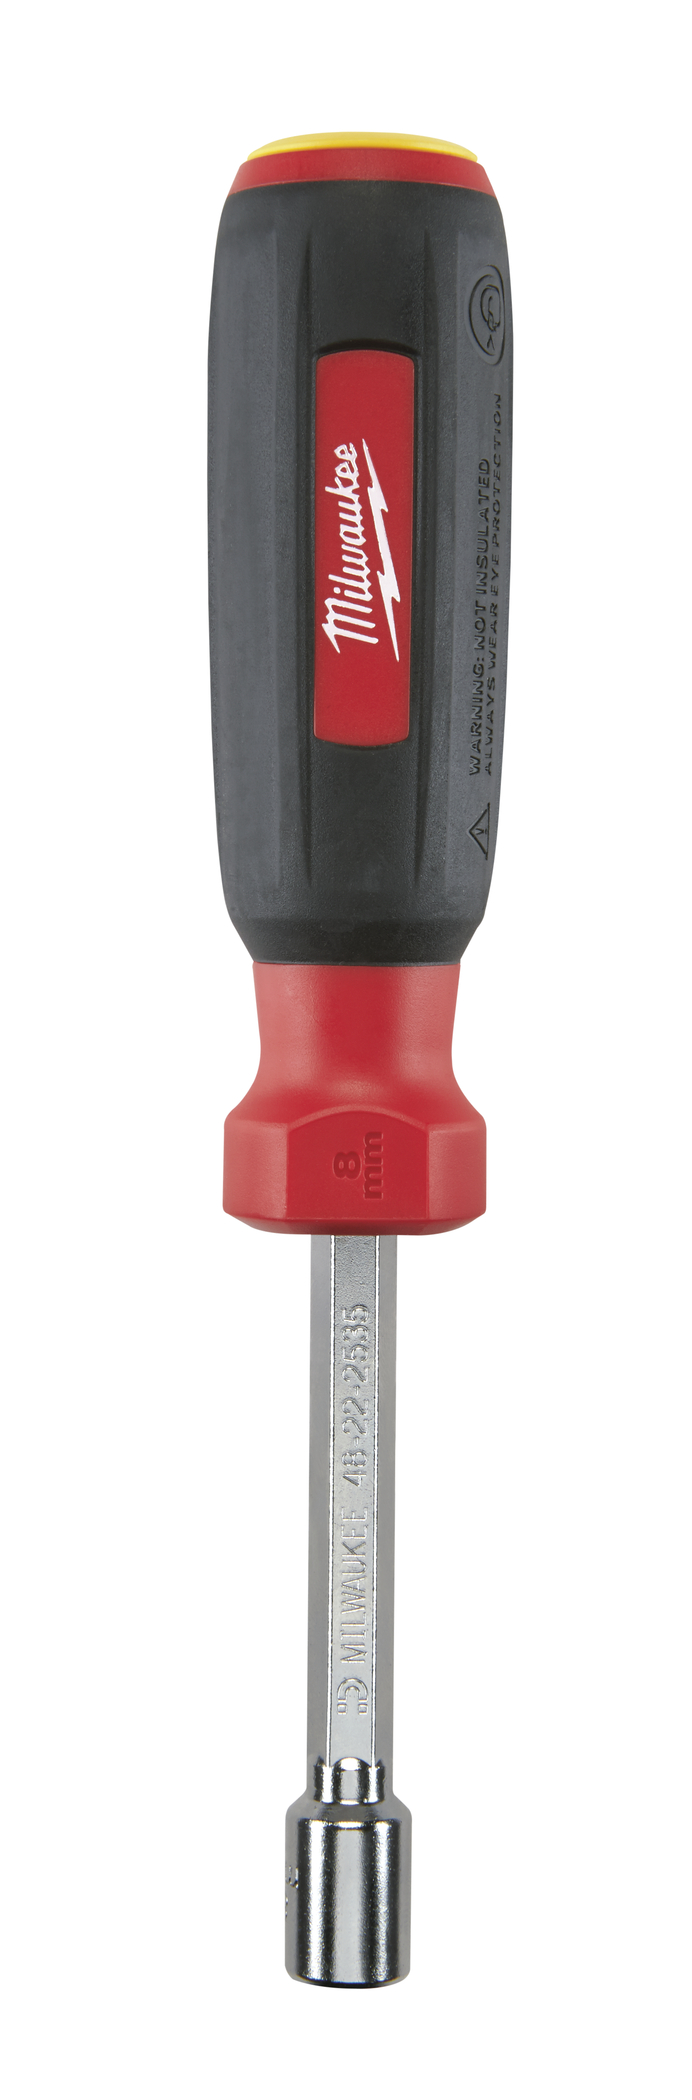 8 mm HollowCore Magnetic Nut Driver